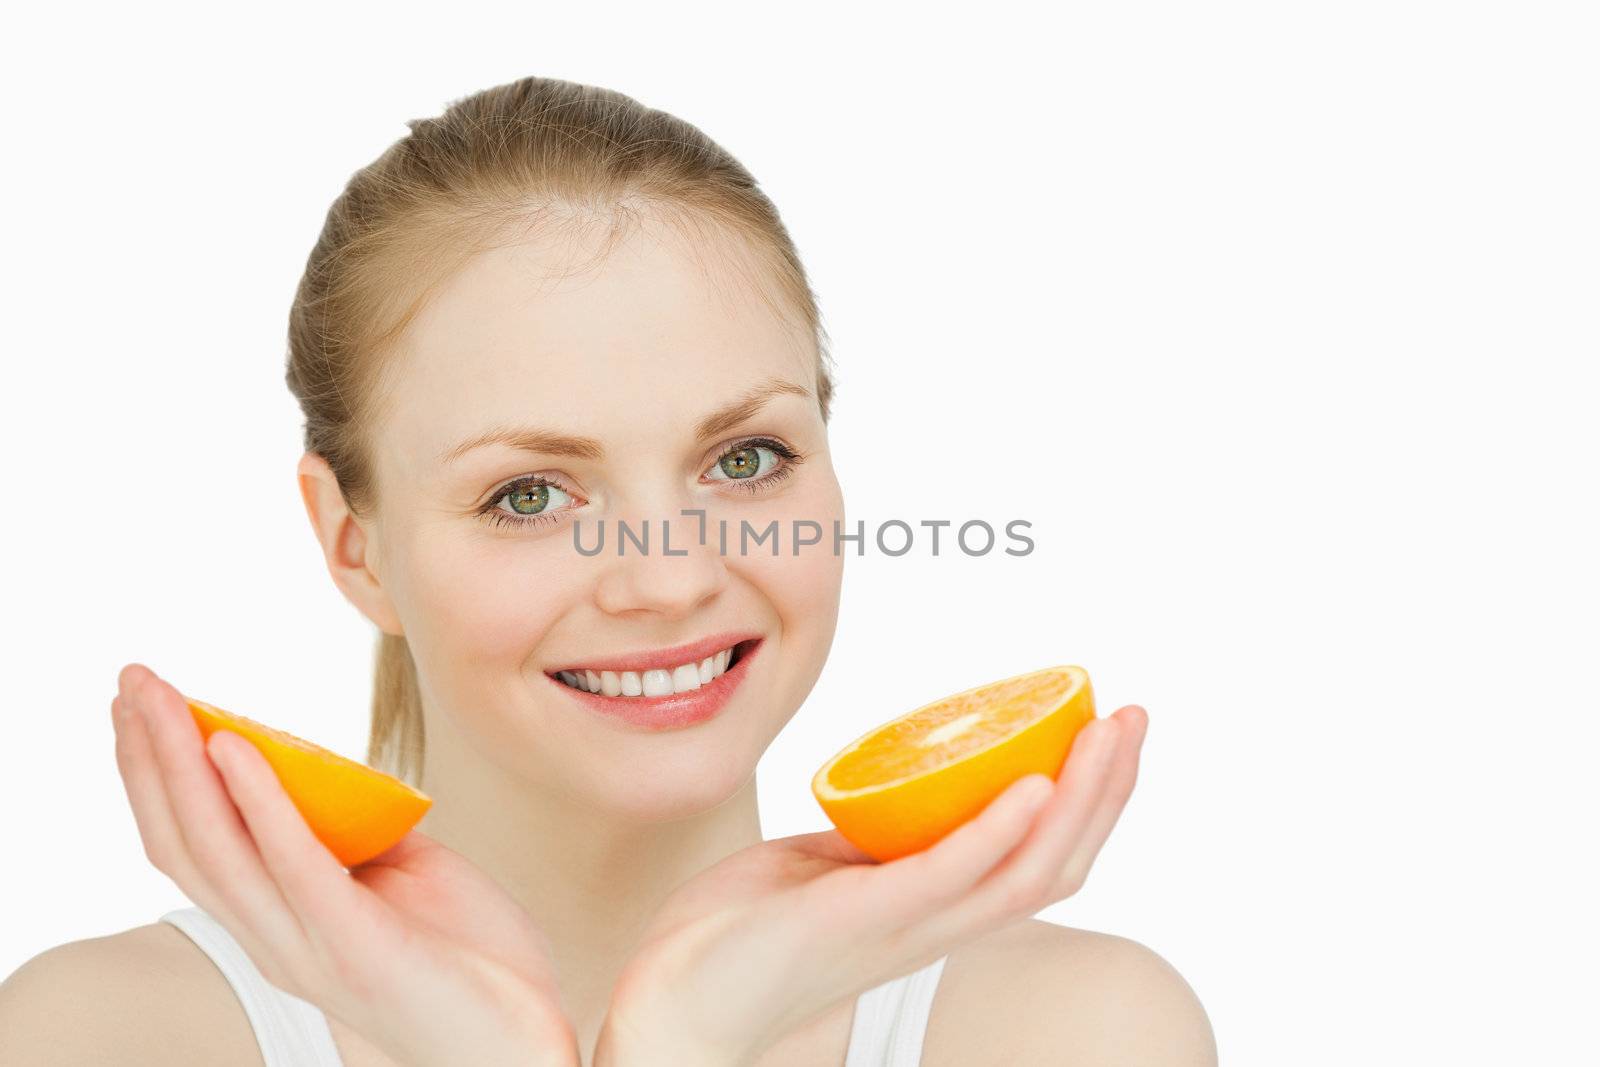 Smiling woman holding oranges against white background